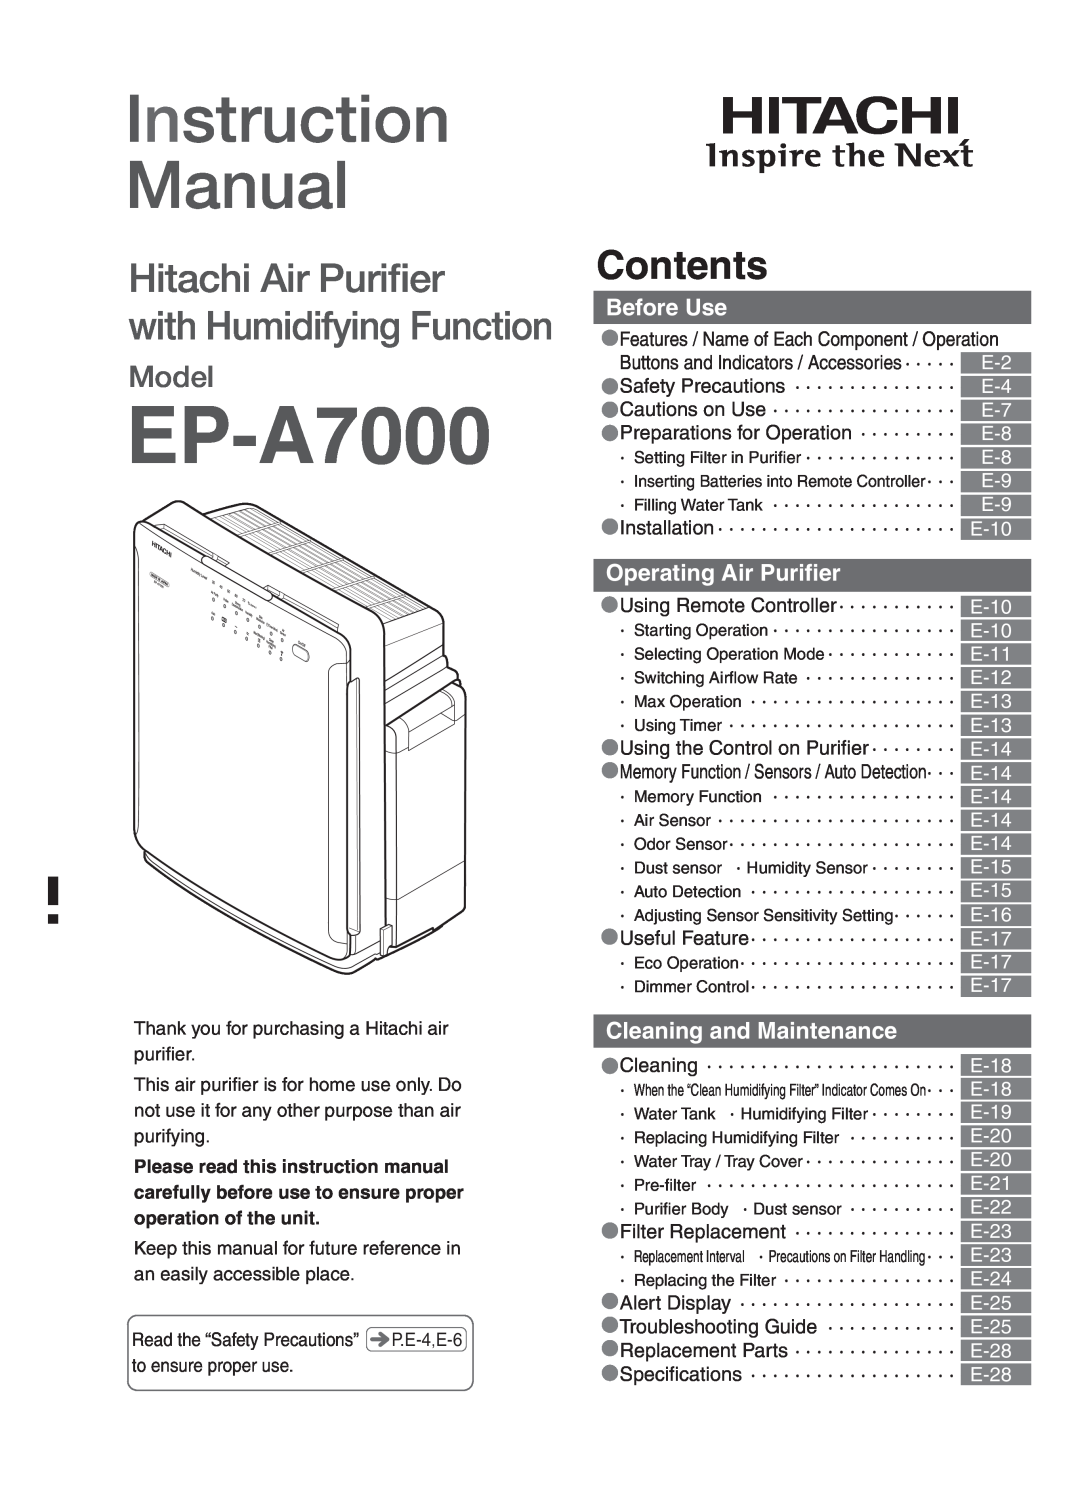 Hitachi EP-A7000 instruction manual Before Use, Operating Air Puriﬁer, Cleaning and Maintenance, Contents, Model 